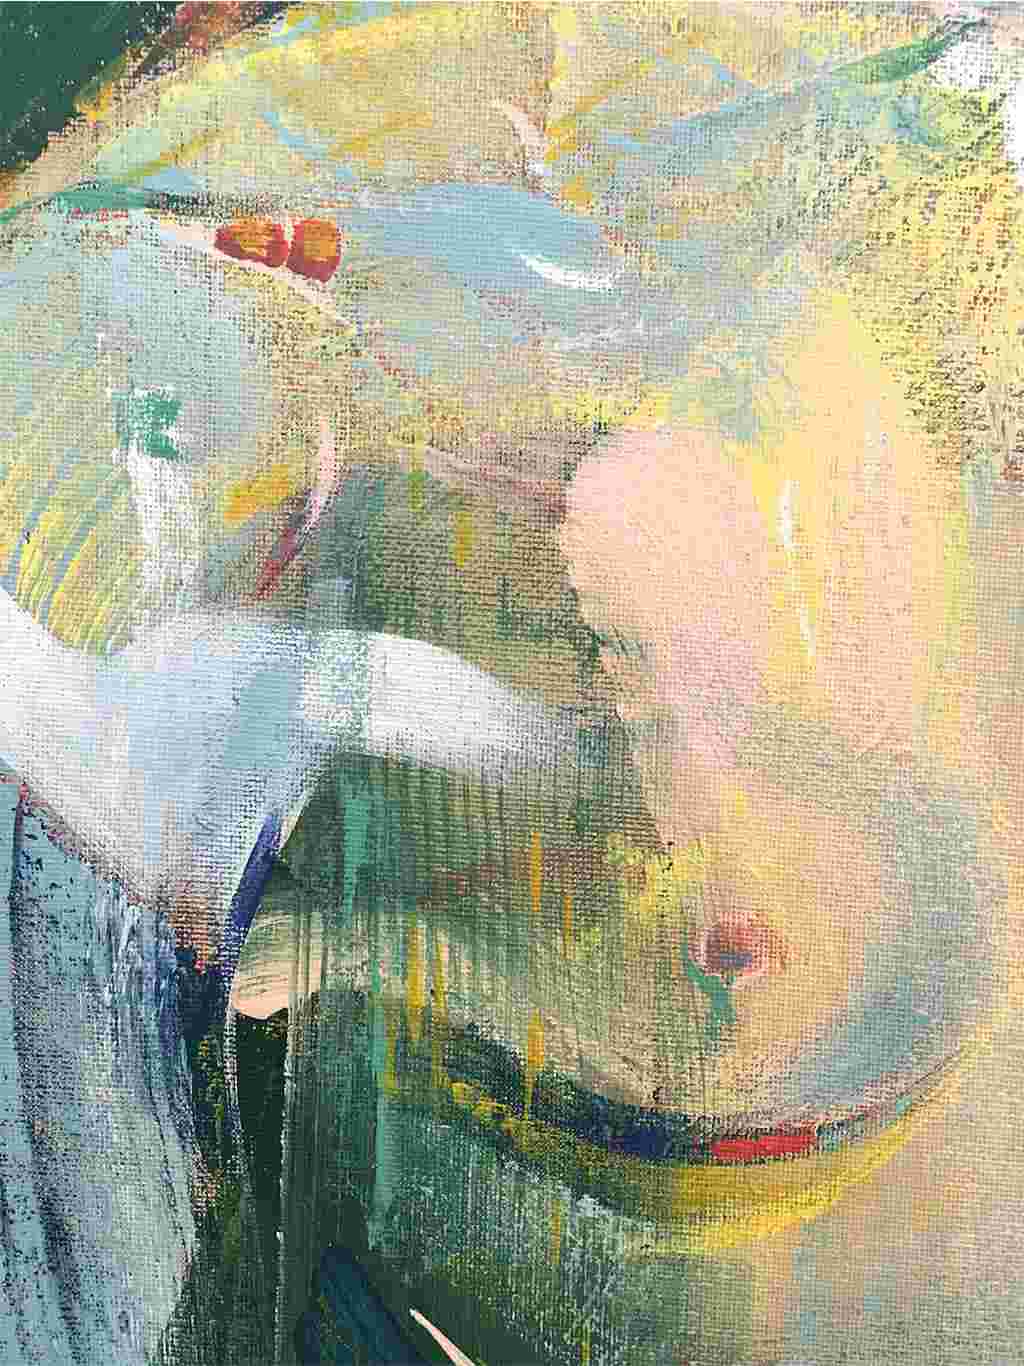 Painting-Bare1-40x50cm-acrylic-web-detail3 Painting, acrylic, canvas, nature, abstract, figure, contemporary, relaxing, figurative, broad strokes